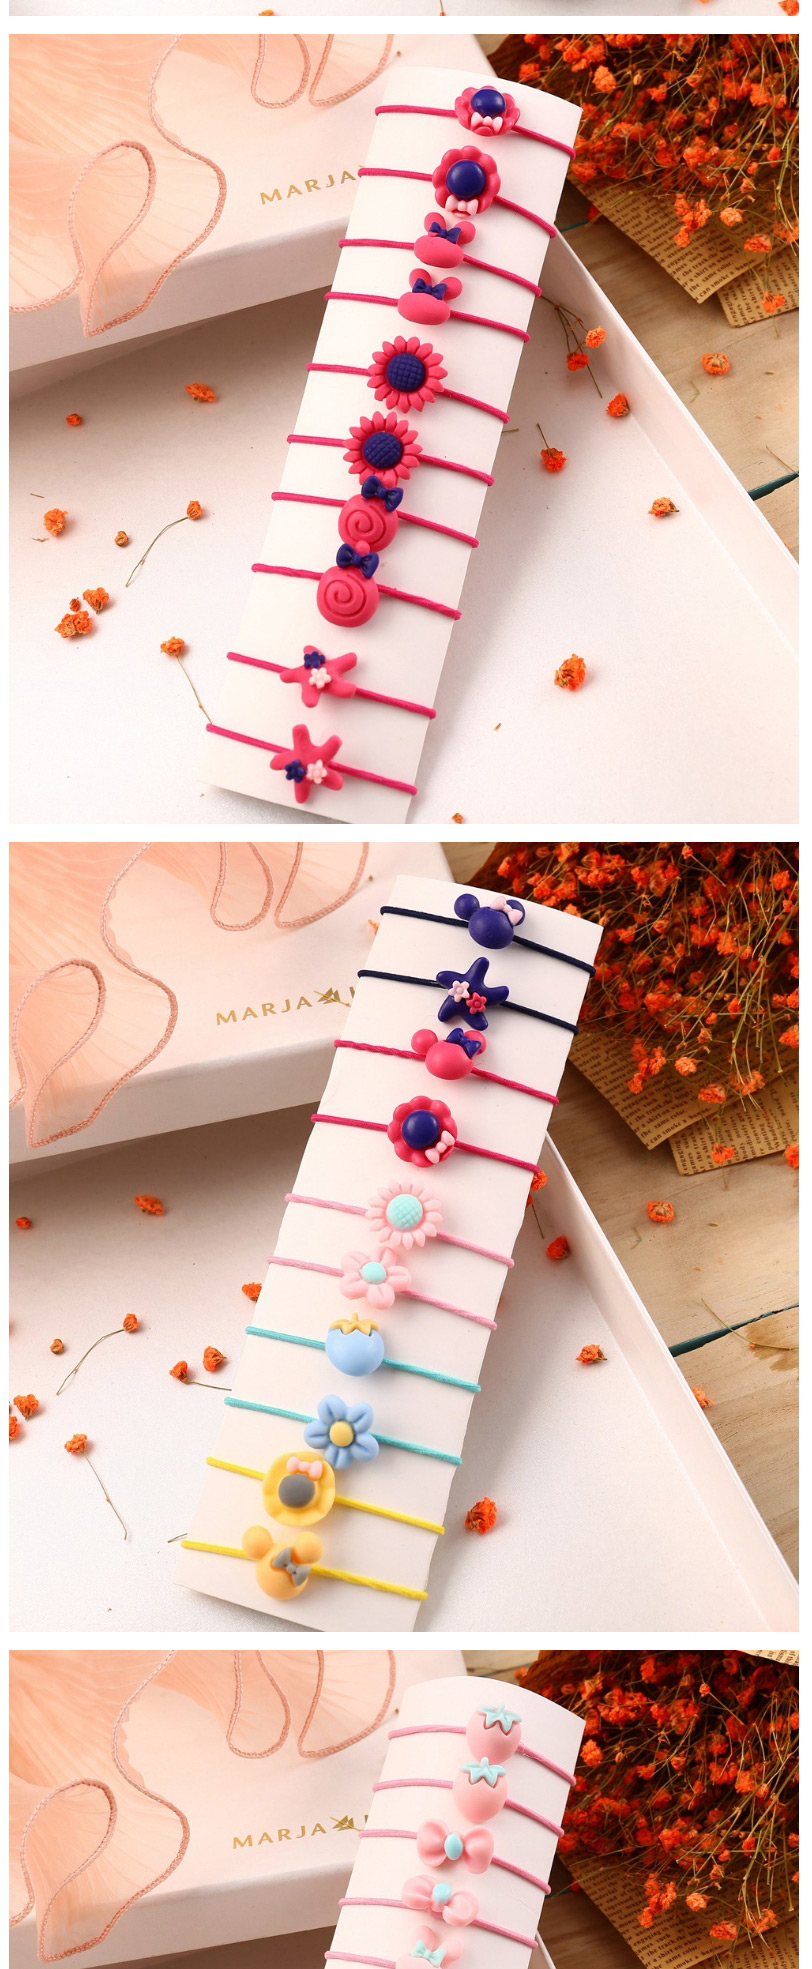 Fashion 40 Colors Flower Five-pointed Star Bow Rabbit Geometric Children